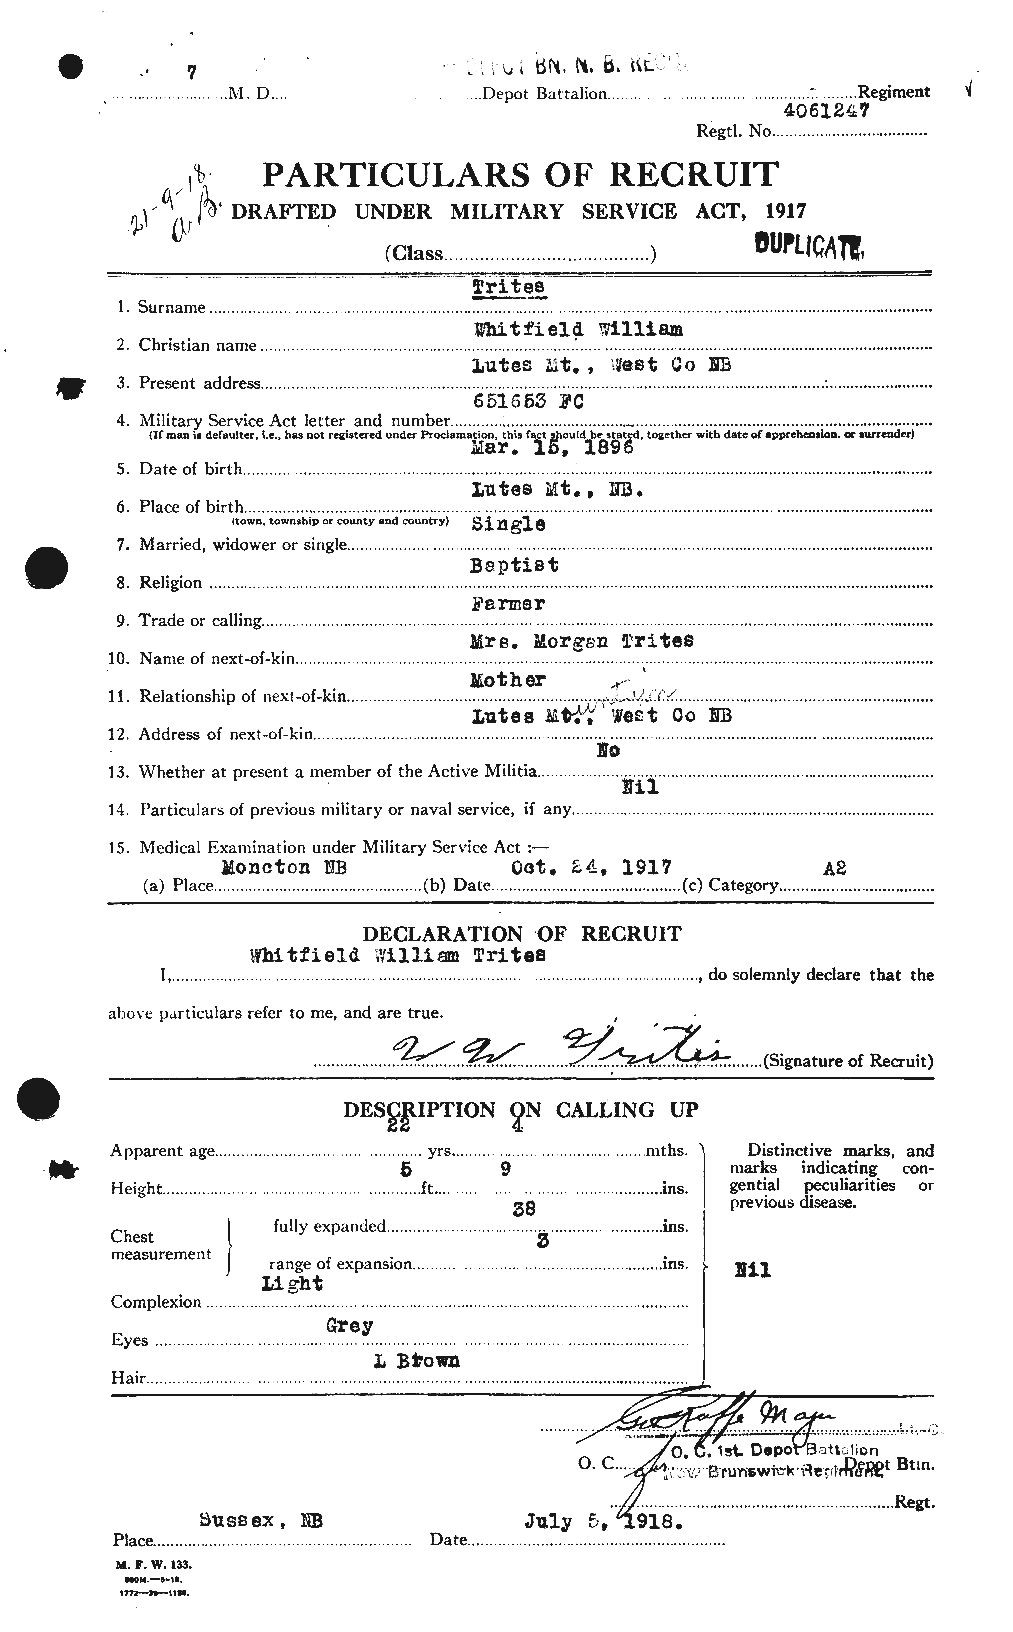 Personnel Records of the First World War - CEF 640162a